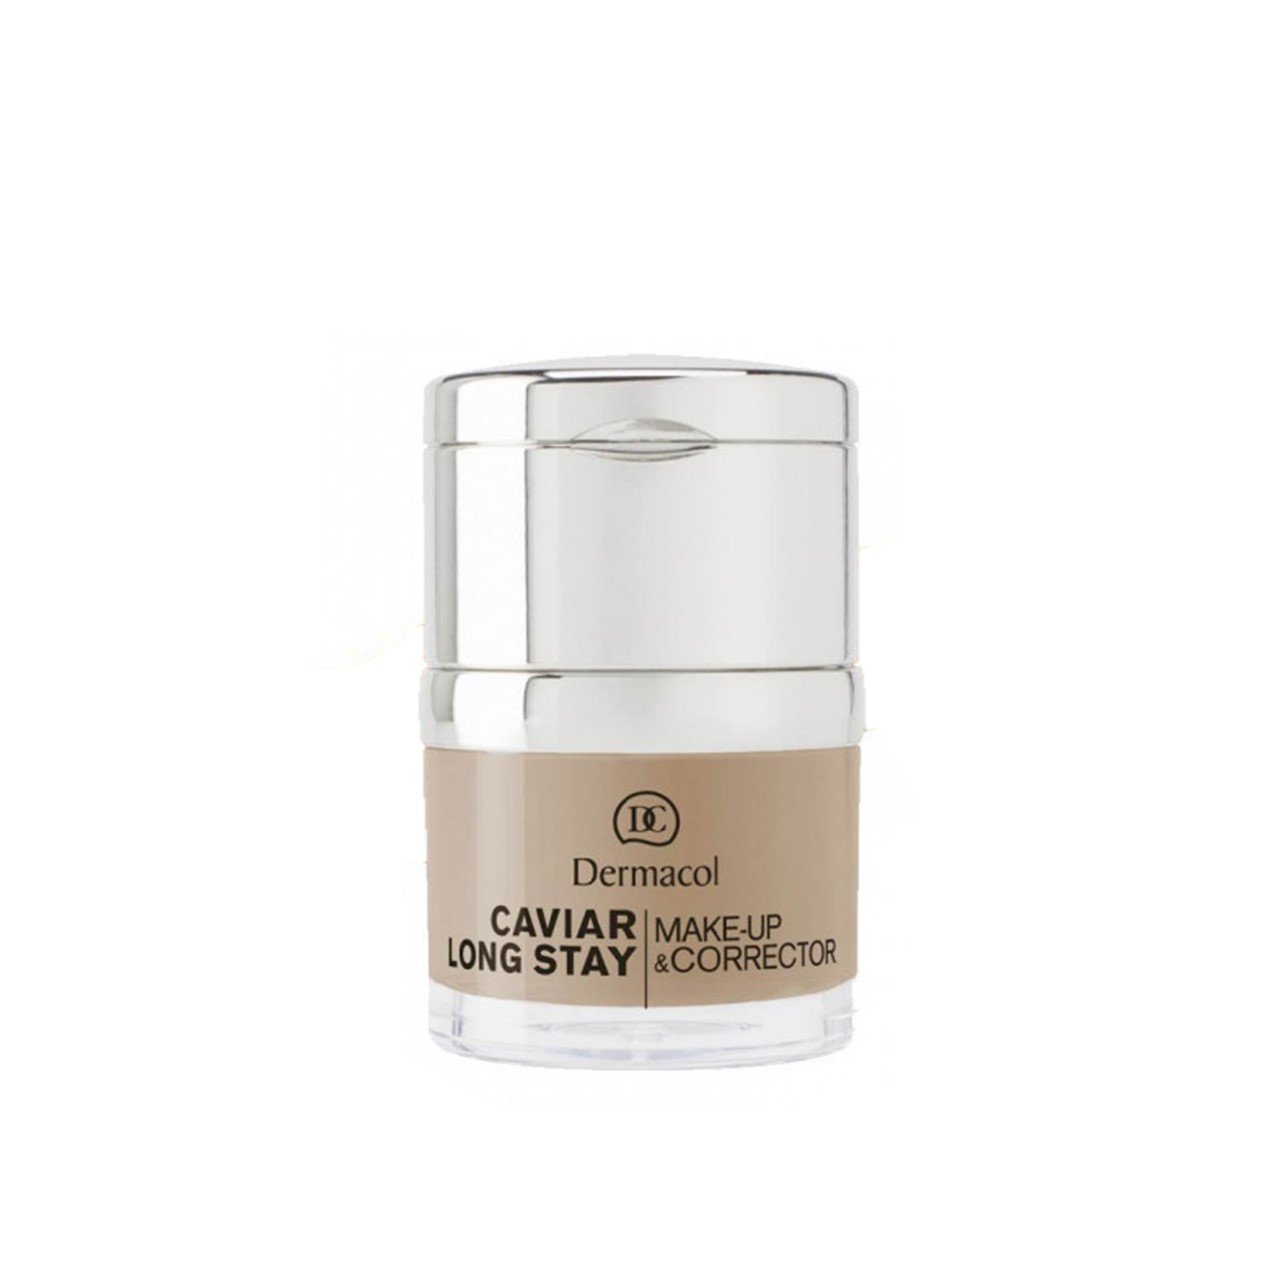 Dermacol Caviar Long Stay Make-Up & Corrector 3 Nude 30ml